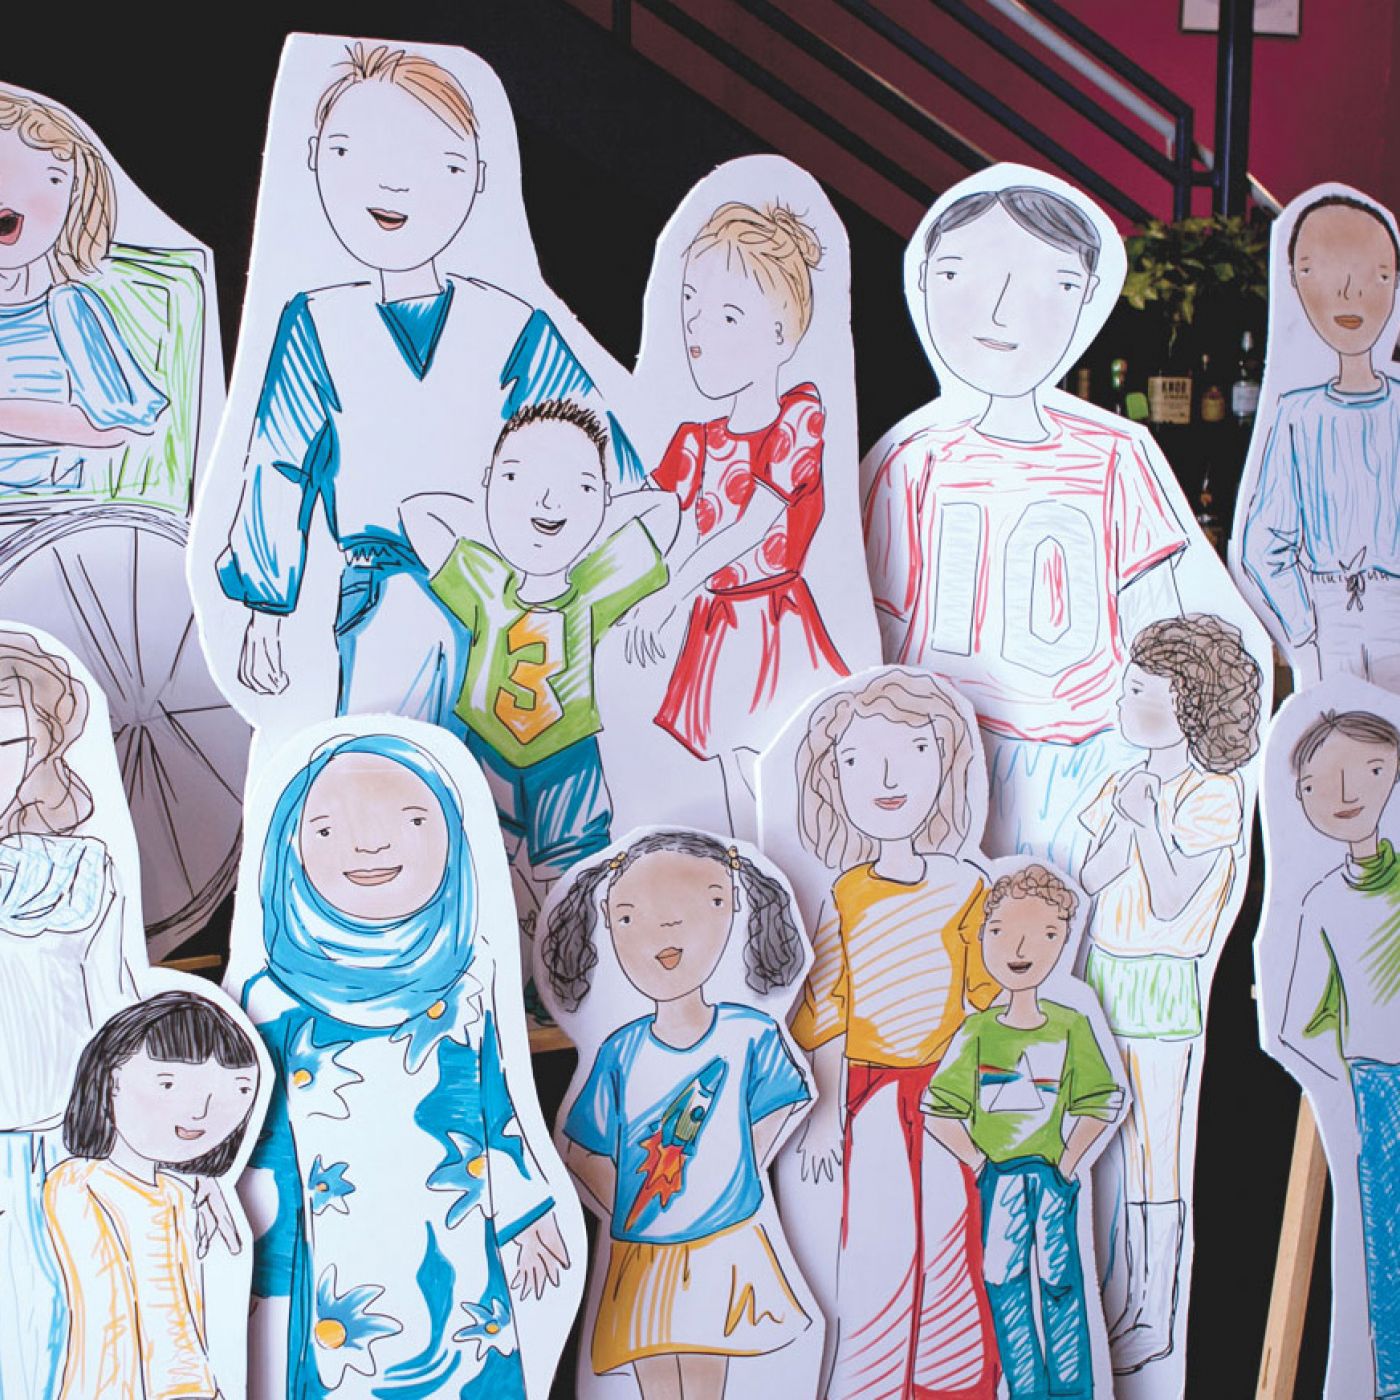 A group of life-sized cardboard cutouts of illustrated diverse children.